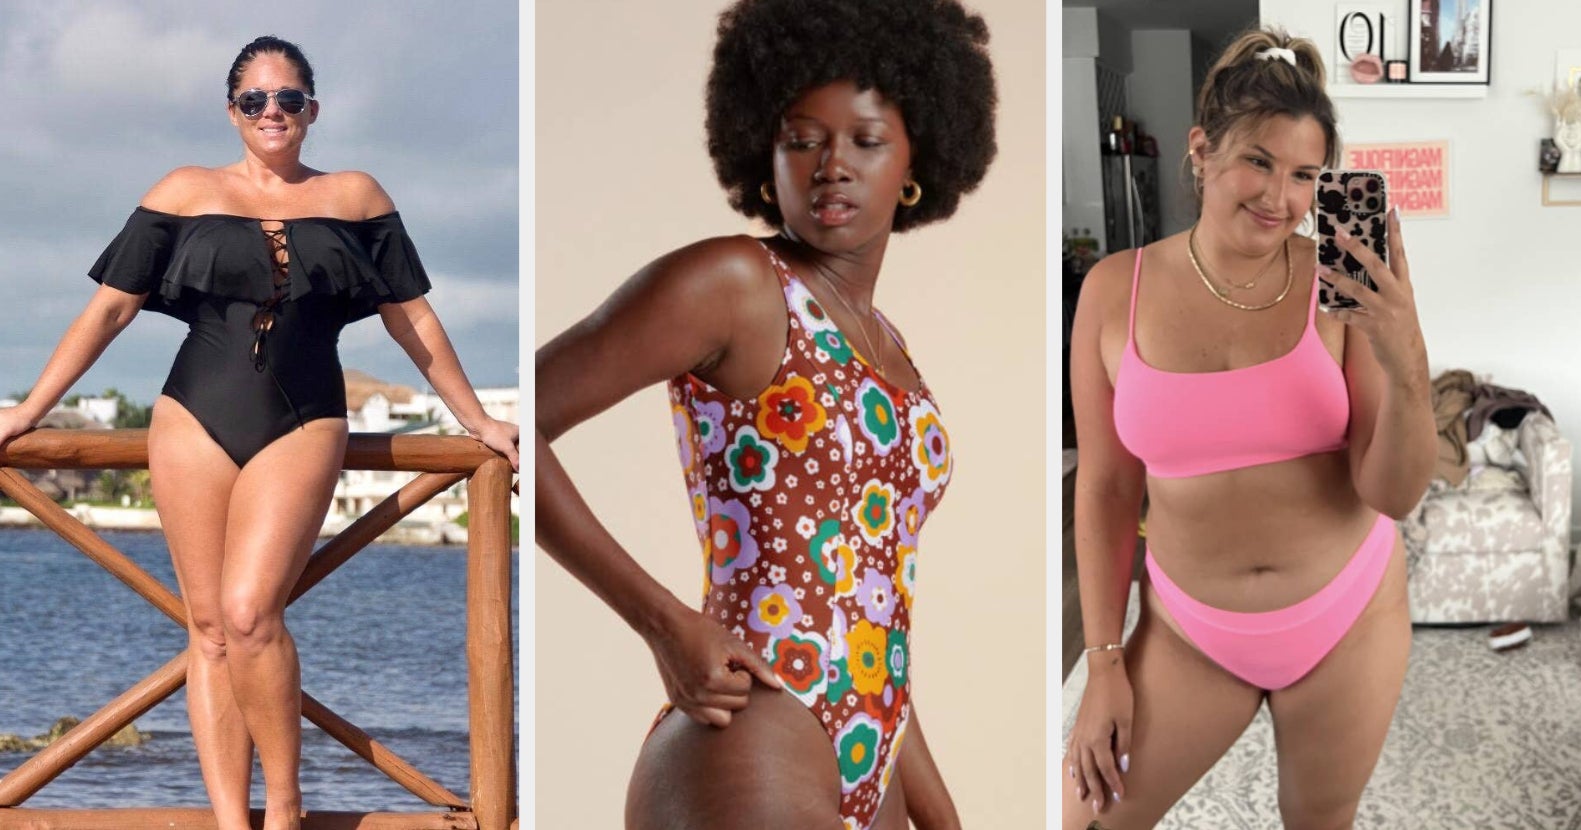 The Most Recommended Swimwear According to our Readers